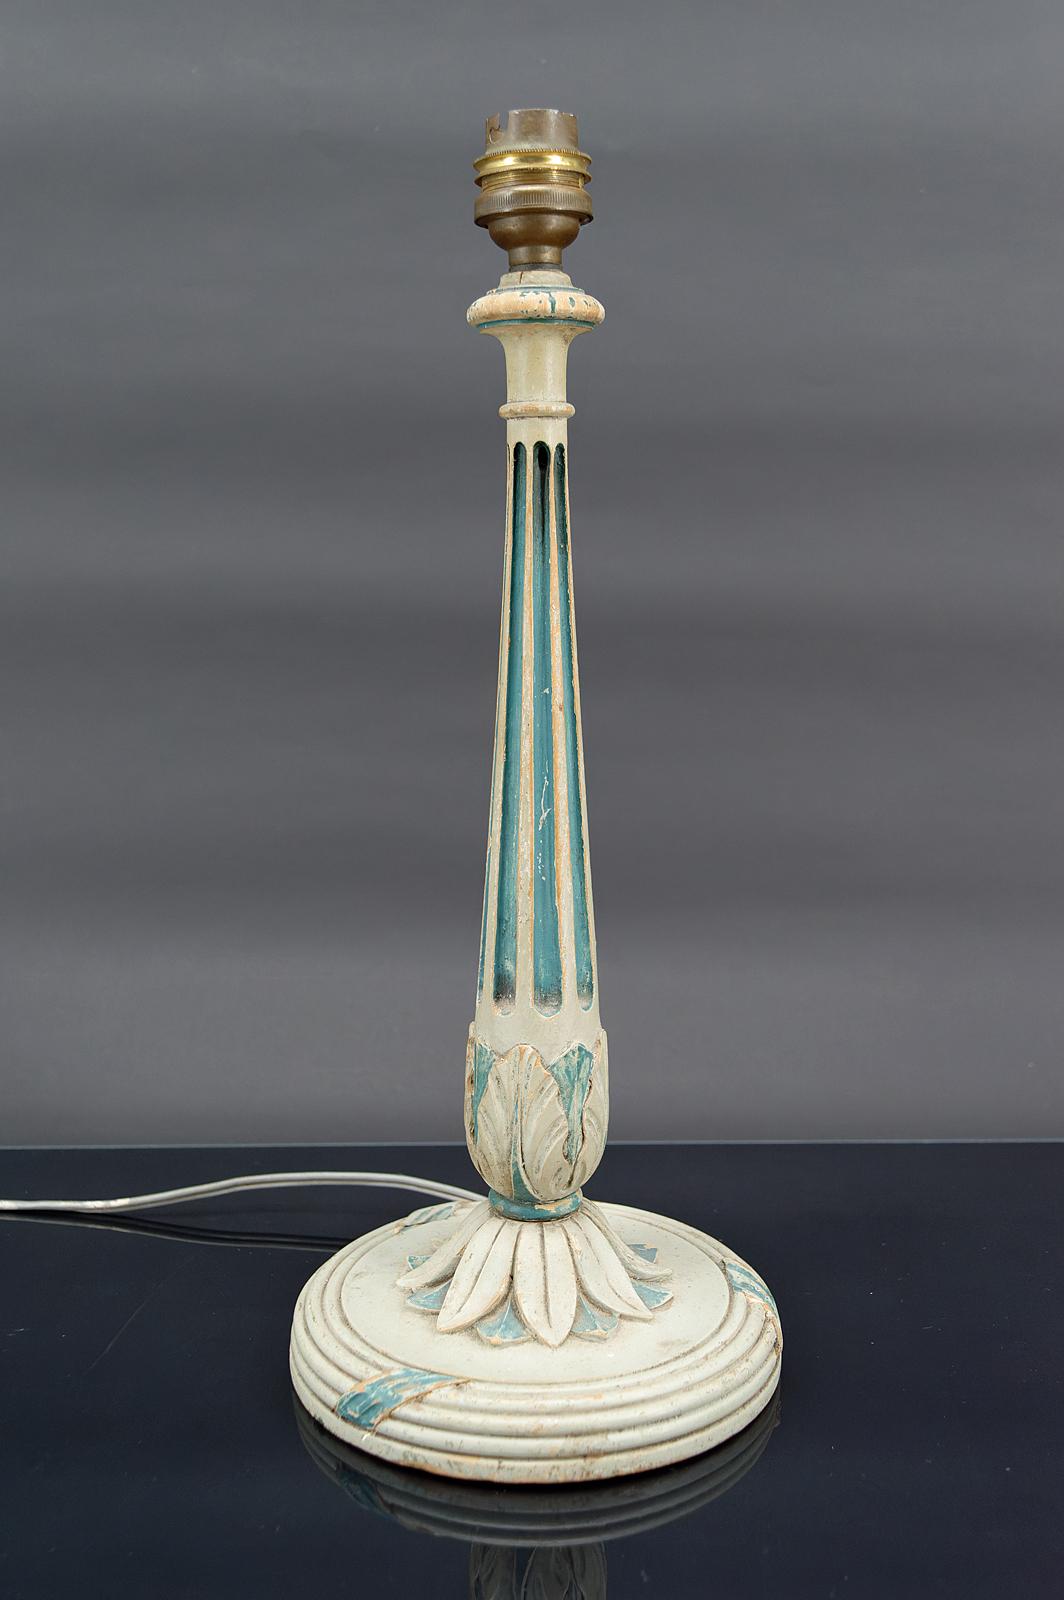 
Wooden lamp painted in white and patinated blue.
Art Deco, France, Circa 1920

In good condition, electricity OK.

Dimensions:
height 34 cm
diameter 14 cm